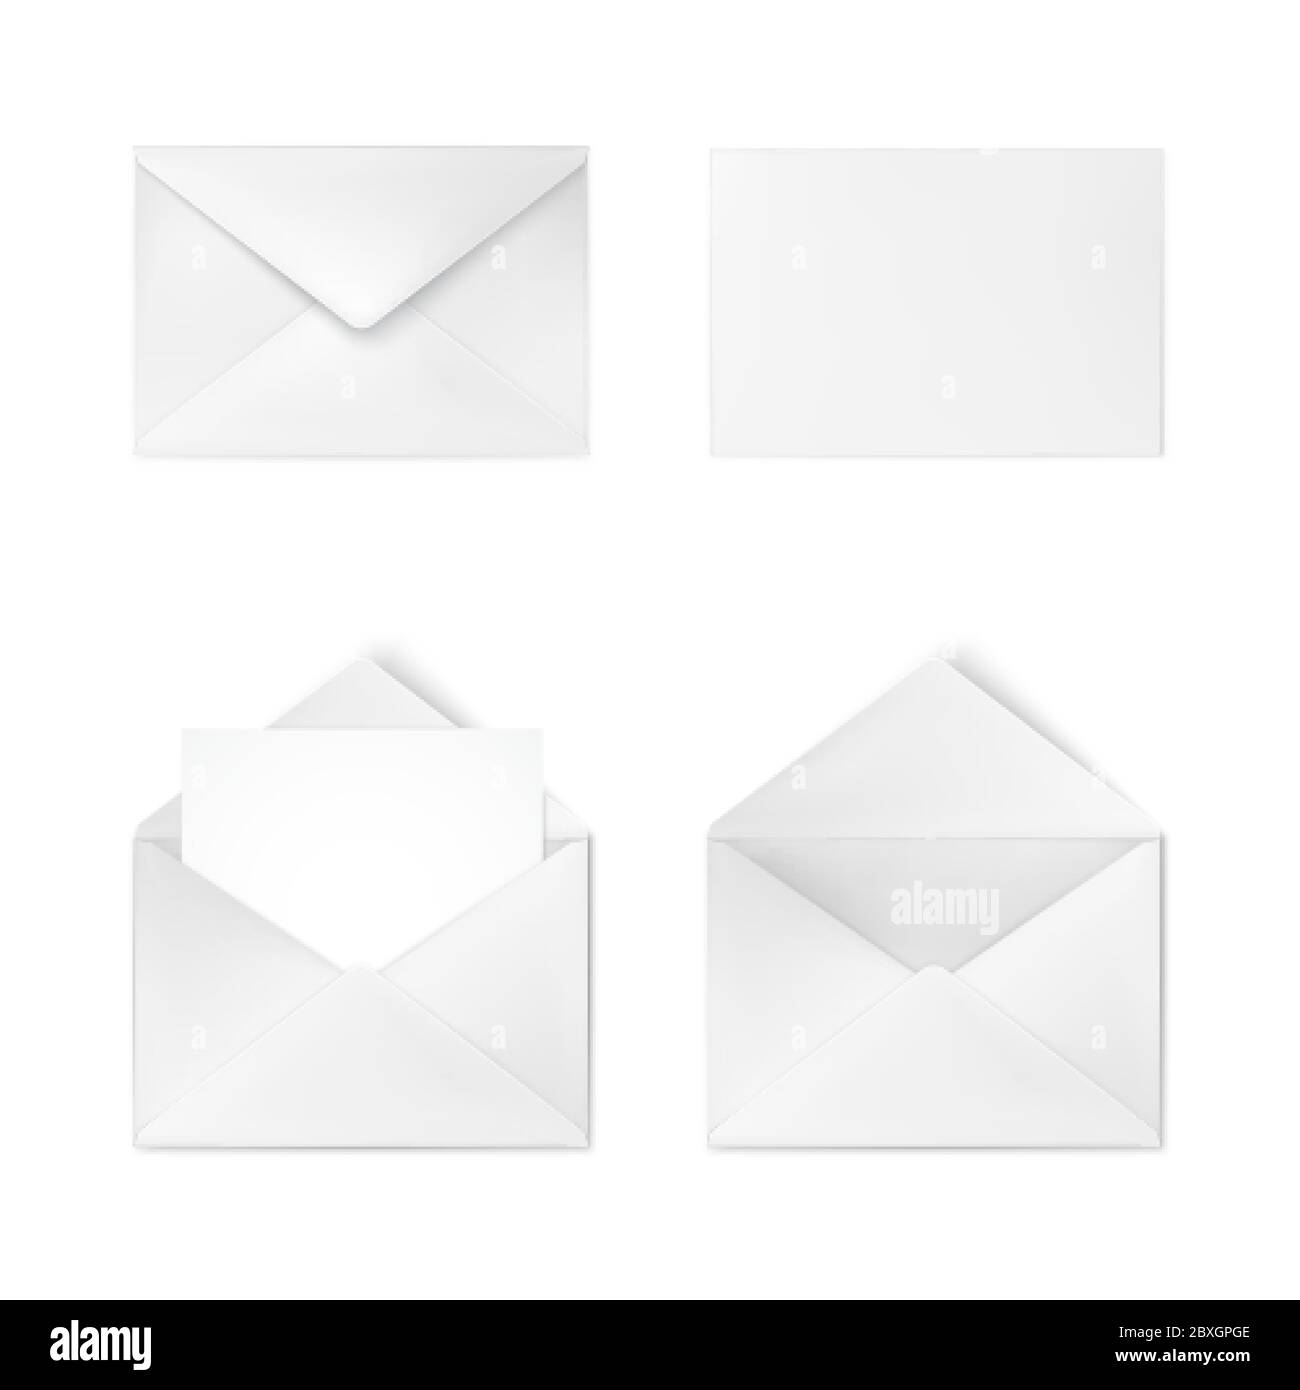 Realistic white envelope. Business mail. Corporate identity envelope mock up. Vector illustration Stock Vector